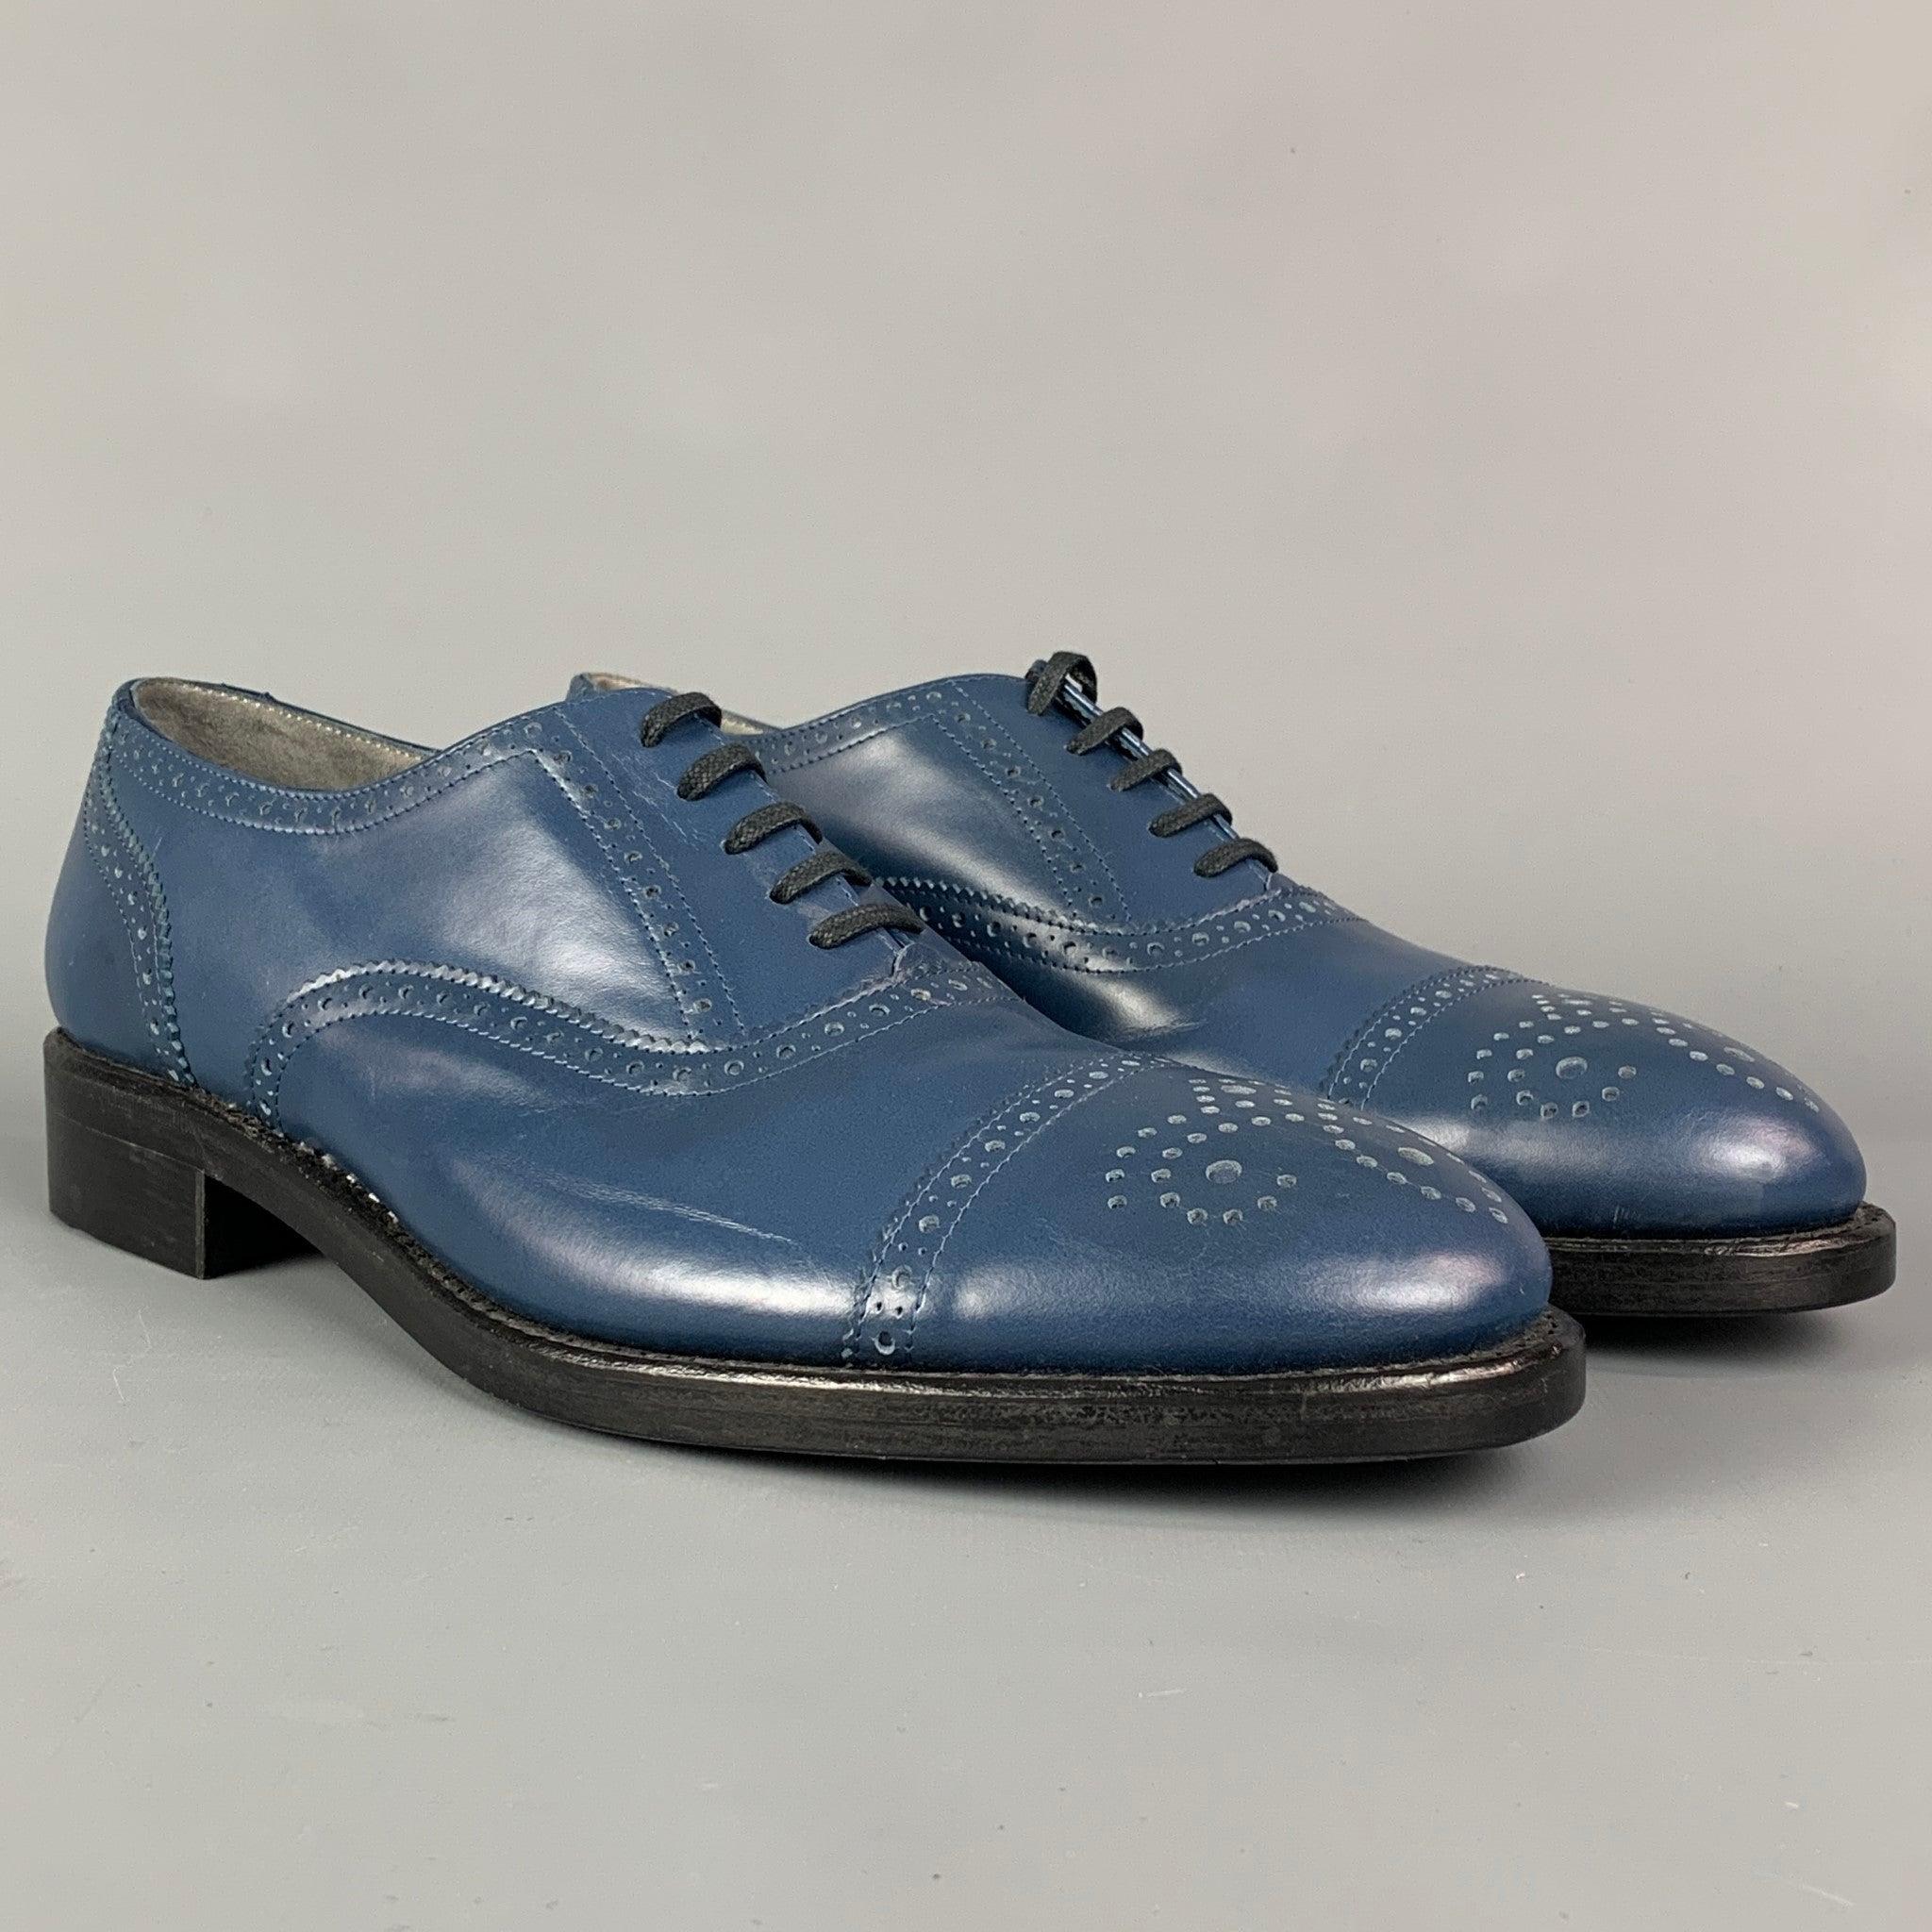 ROBERT CLERGERIE for J. FENESTRIER shoes comes in a blue perforated featuring a cap toe, leather sole, and a lace up closure. Made in France.Very Good
Pre-Owned Condition. 

Marked:   42.5 E 01 0951 24Outsole: 12 inches  x 4 inches 
  
  
